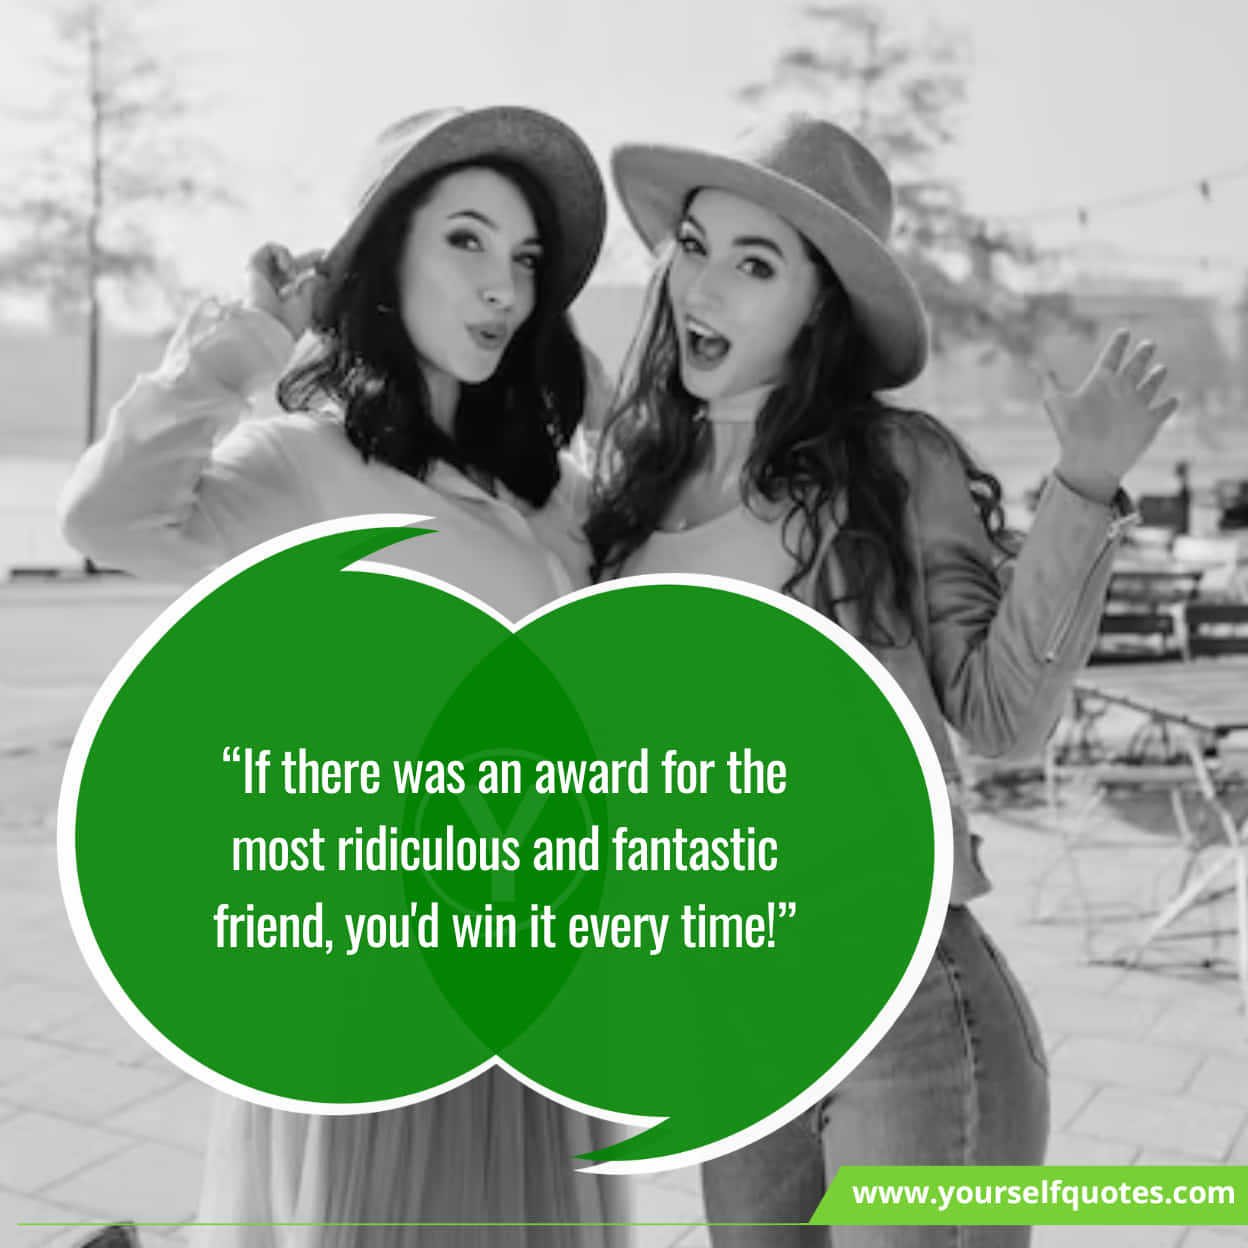 Heartwarming and funny messages for your besties